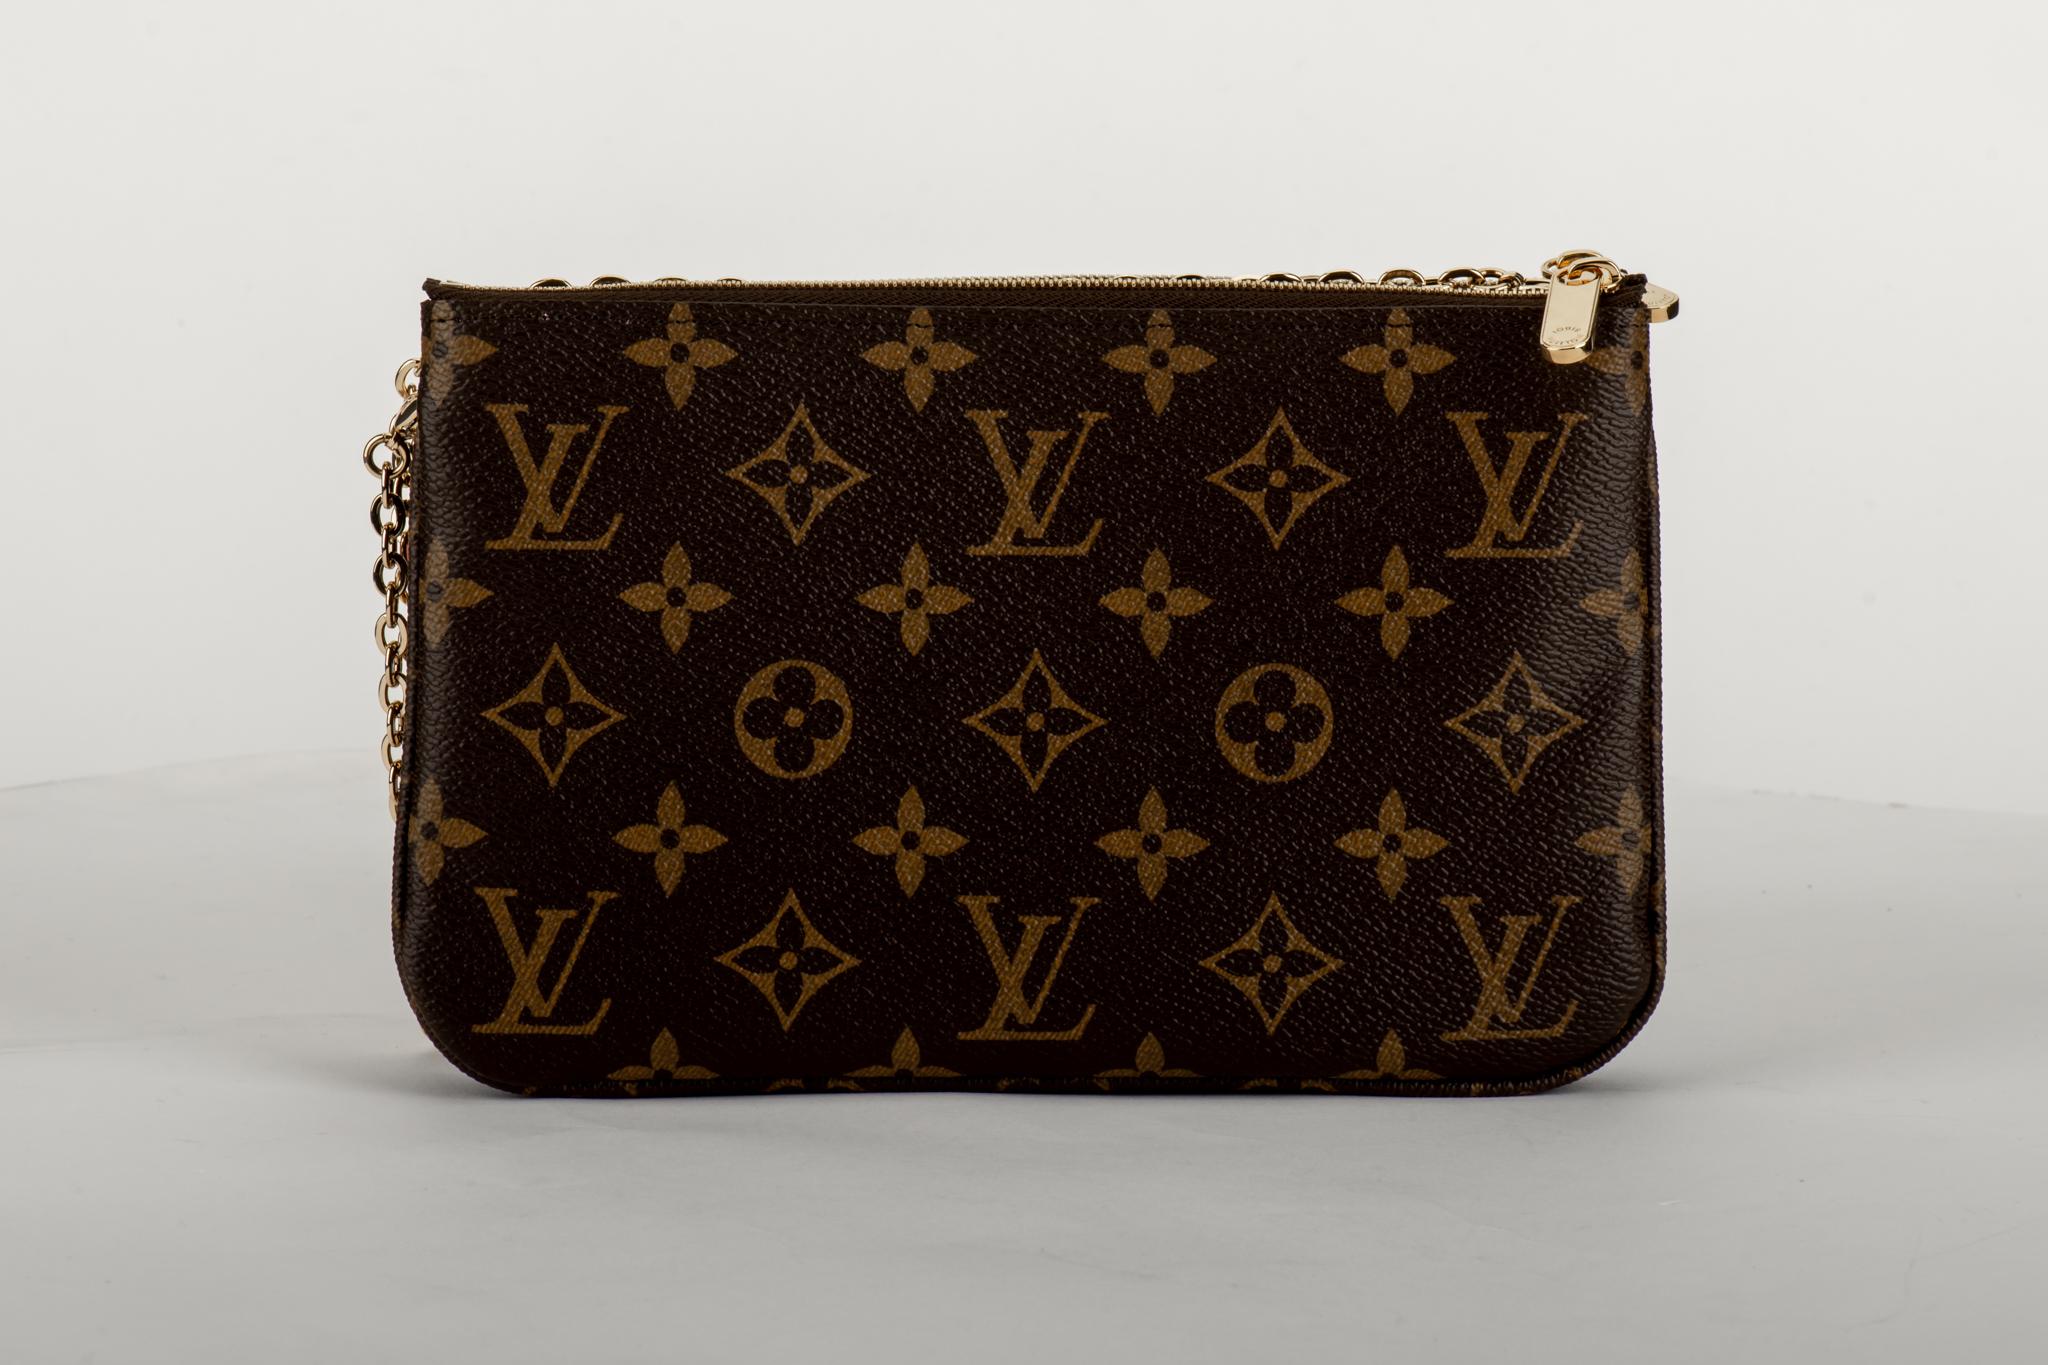 Louis Vuitton limited edition double pouchette in coated monogram canvas with Shangai Christmas design. Double zipped compartments with middle open pocket, can be used as a pouchette or as a crossbody. Comes with original dust cover and box . Never